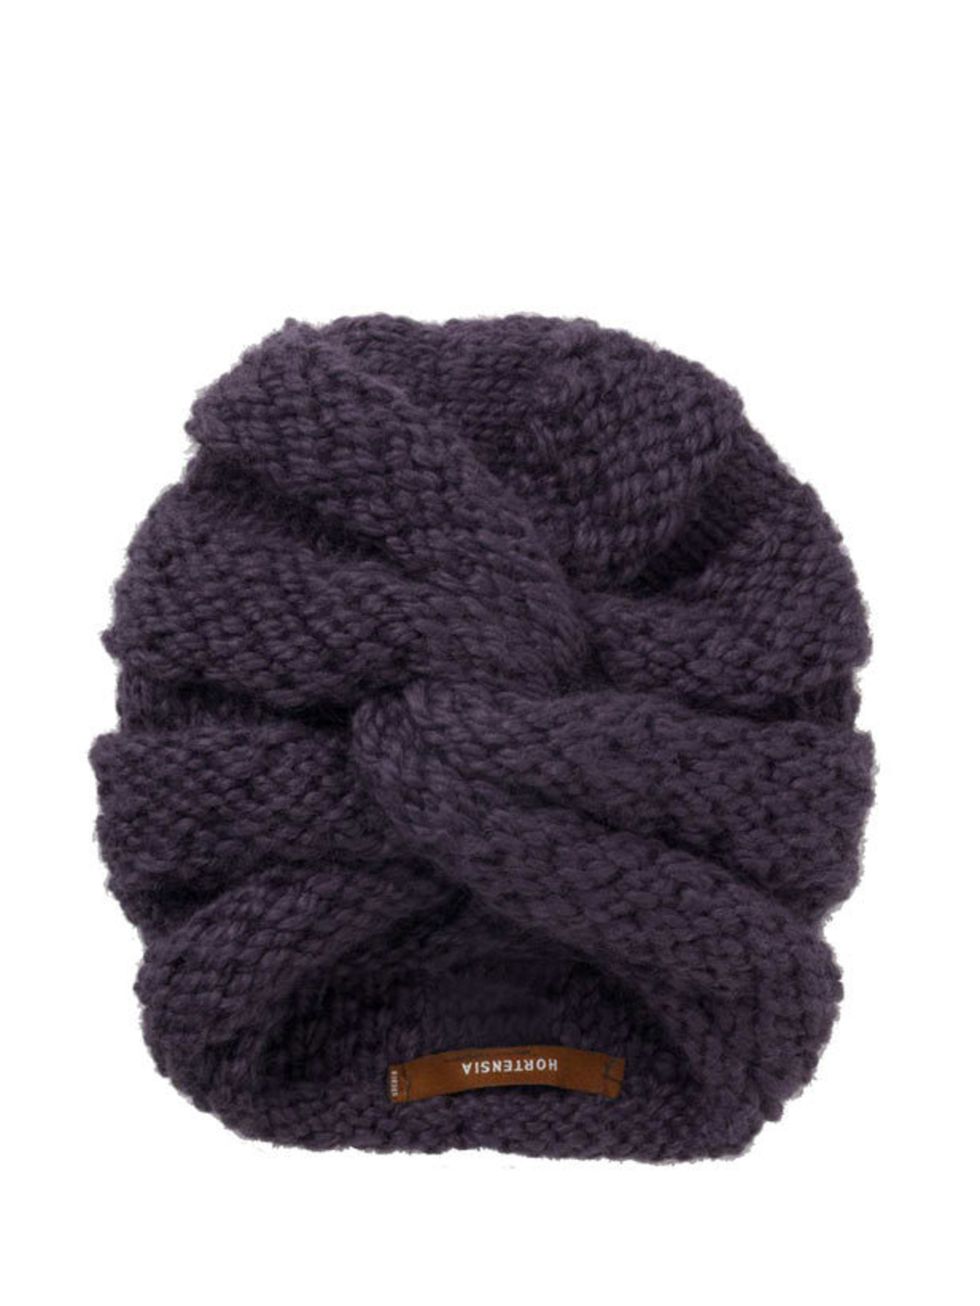 <p><a href="http://www.anthropologie.eu/en/uk/hats/neatly-knotted-turban/invt/7152430600001/">Anthropologie</a> knitted turban, £118</p>